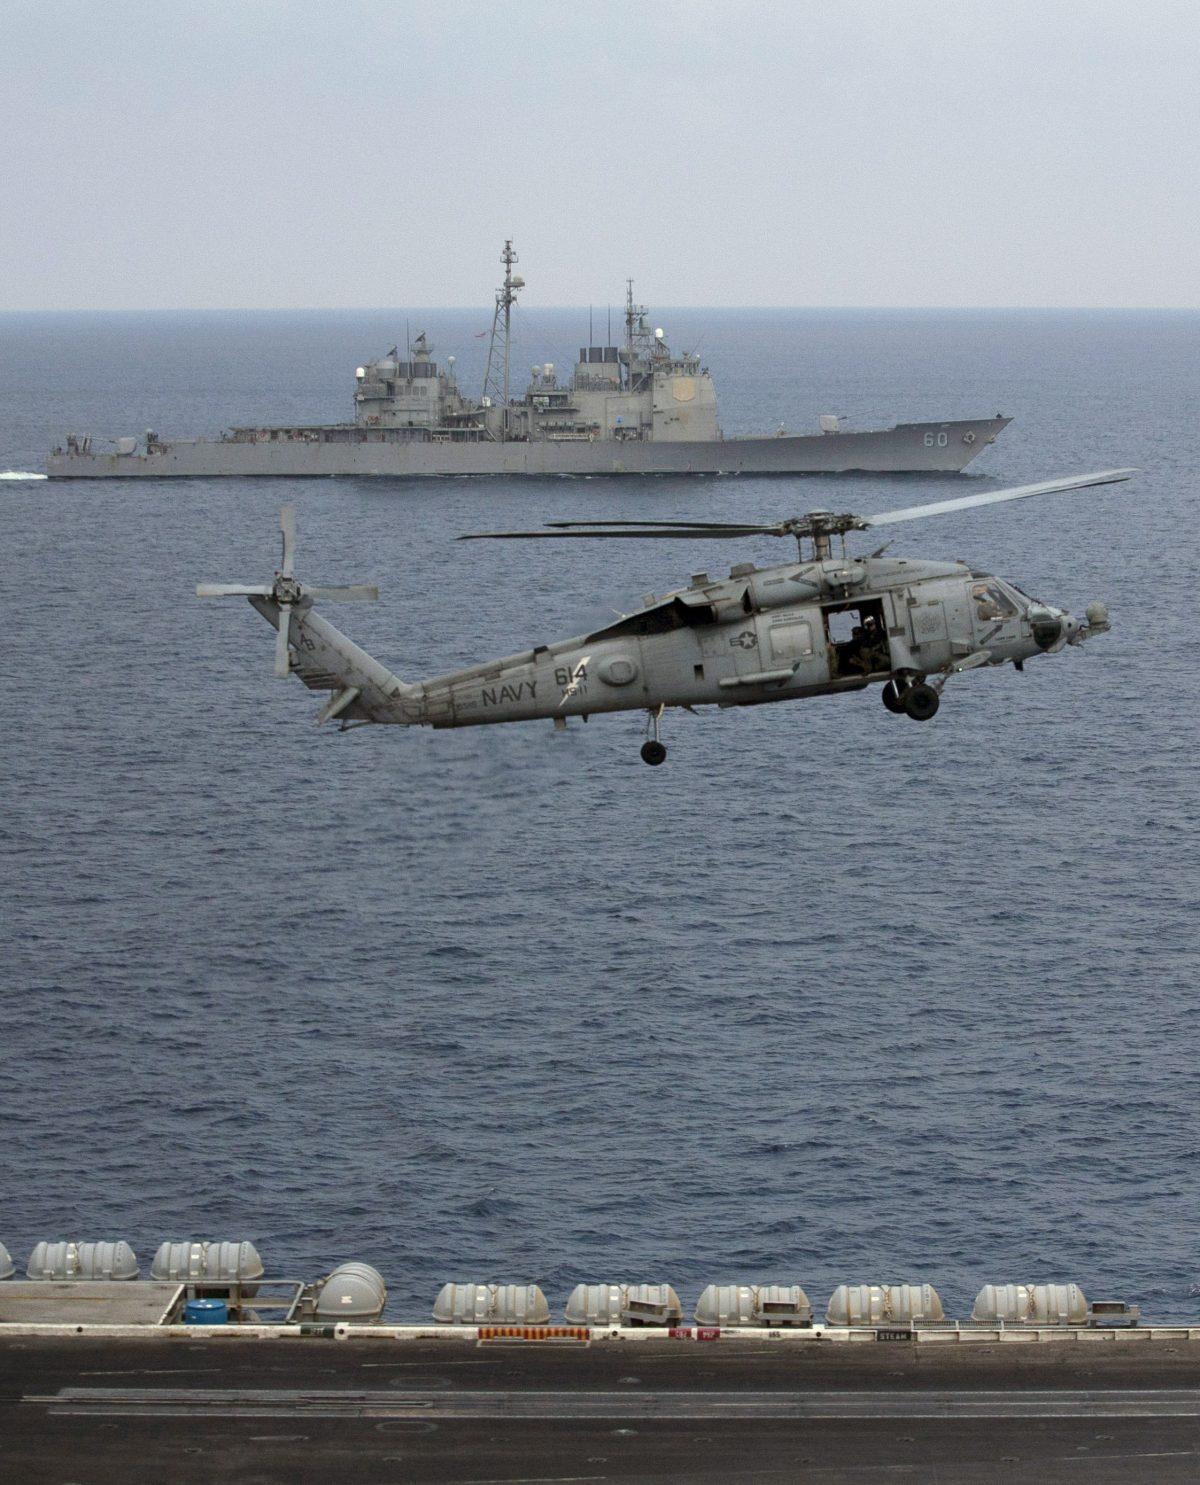 A U.S. Navy helicopter approaches to land on the deck of the aircraft carrier USS Theodore Roosevelt (CVN 71), as the USS Normandy sails in the Bay of Bengal during Exercise Malabar 2015, some 152 miles off the eastern coast of Chennai, India, on Oct. 17, 2015. Naval warships, aircraft carriers, and submarines from the United States, India, and Japan are conducting joint military exercises off India's east coast, signaling the growing strategic ties between the three navies as they face up to a rising China. (Arun Sankar K./AP Photo)